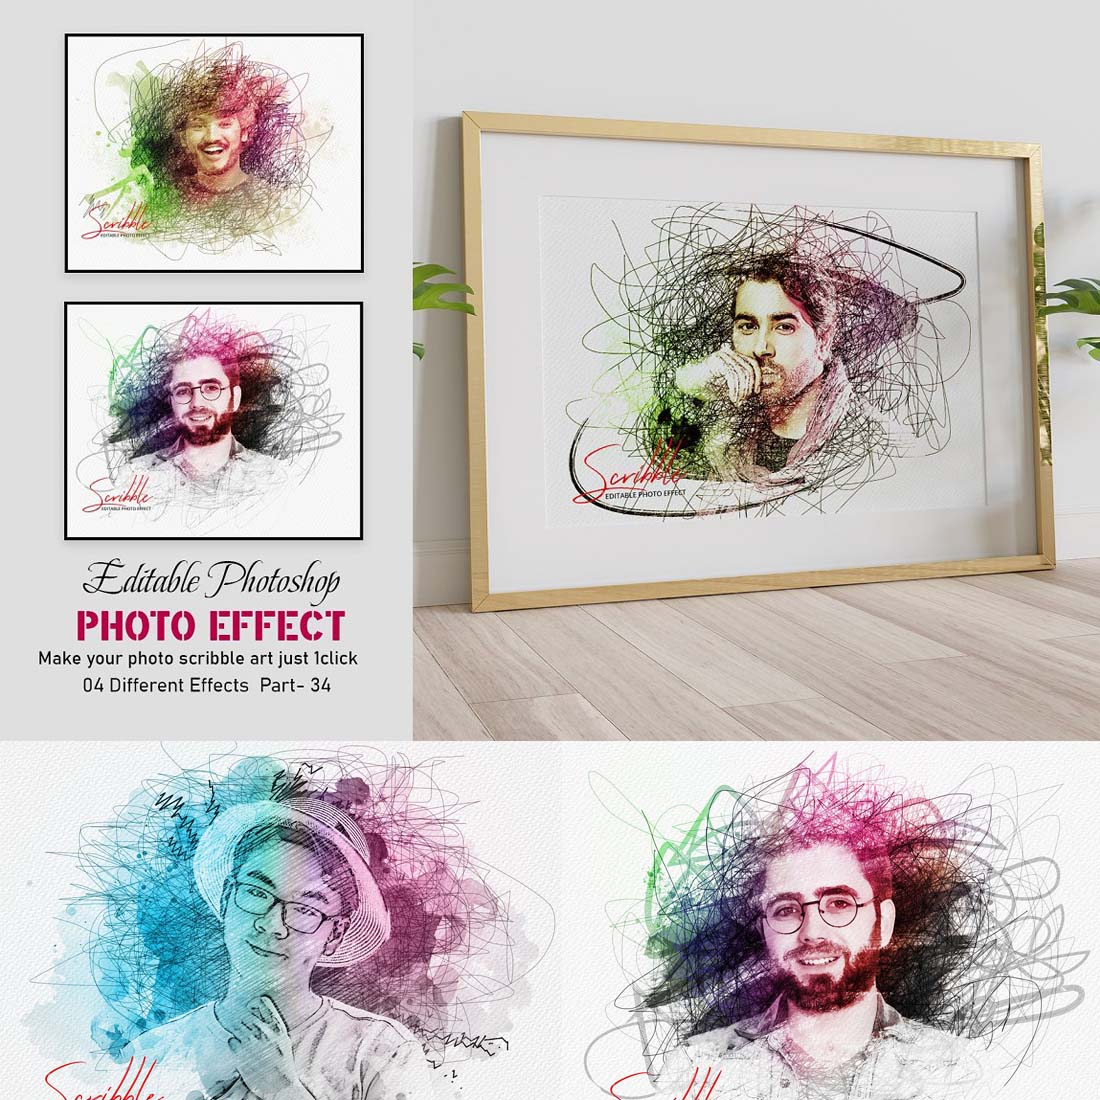 Colorful Photo Effect Scribble Art cover image.